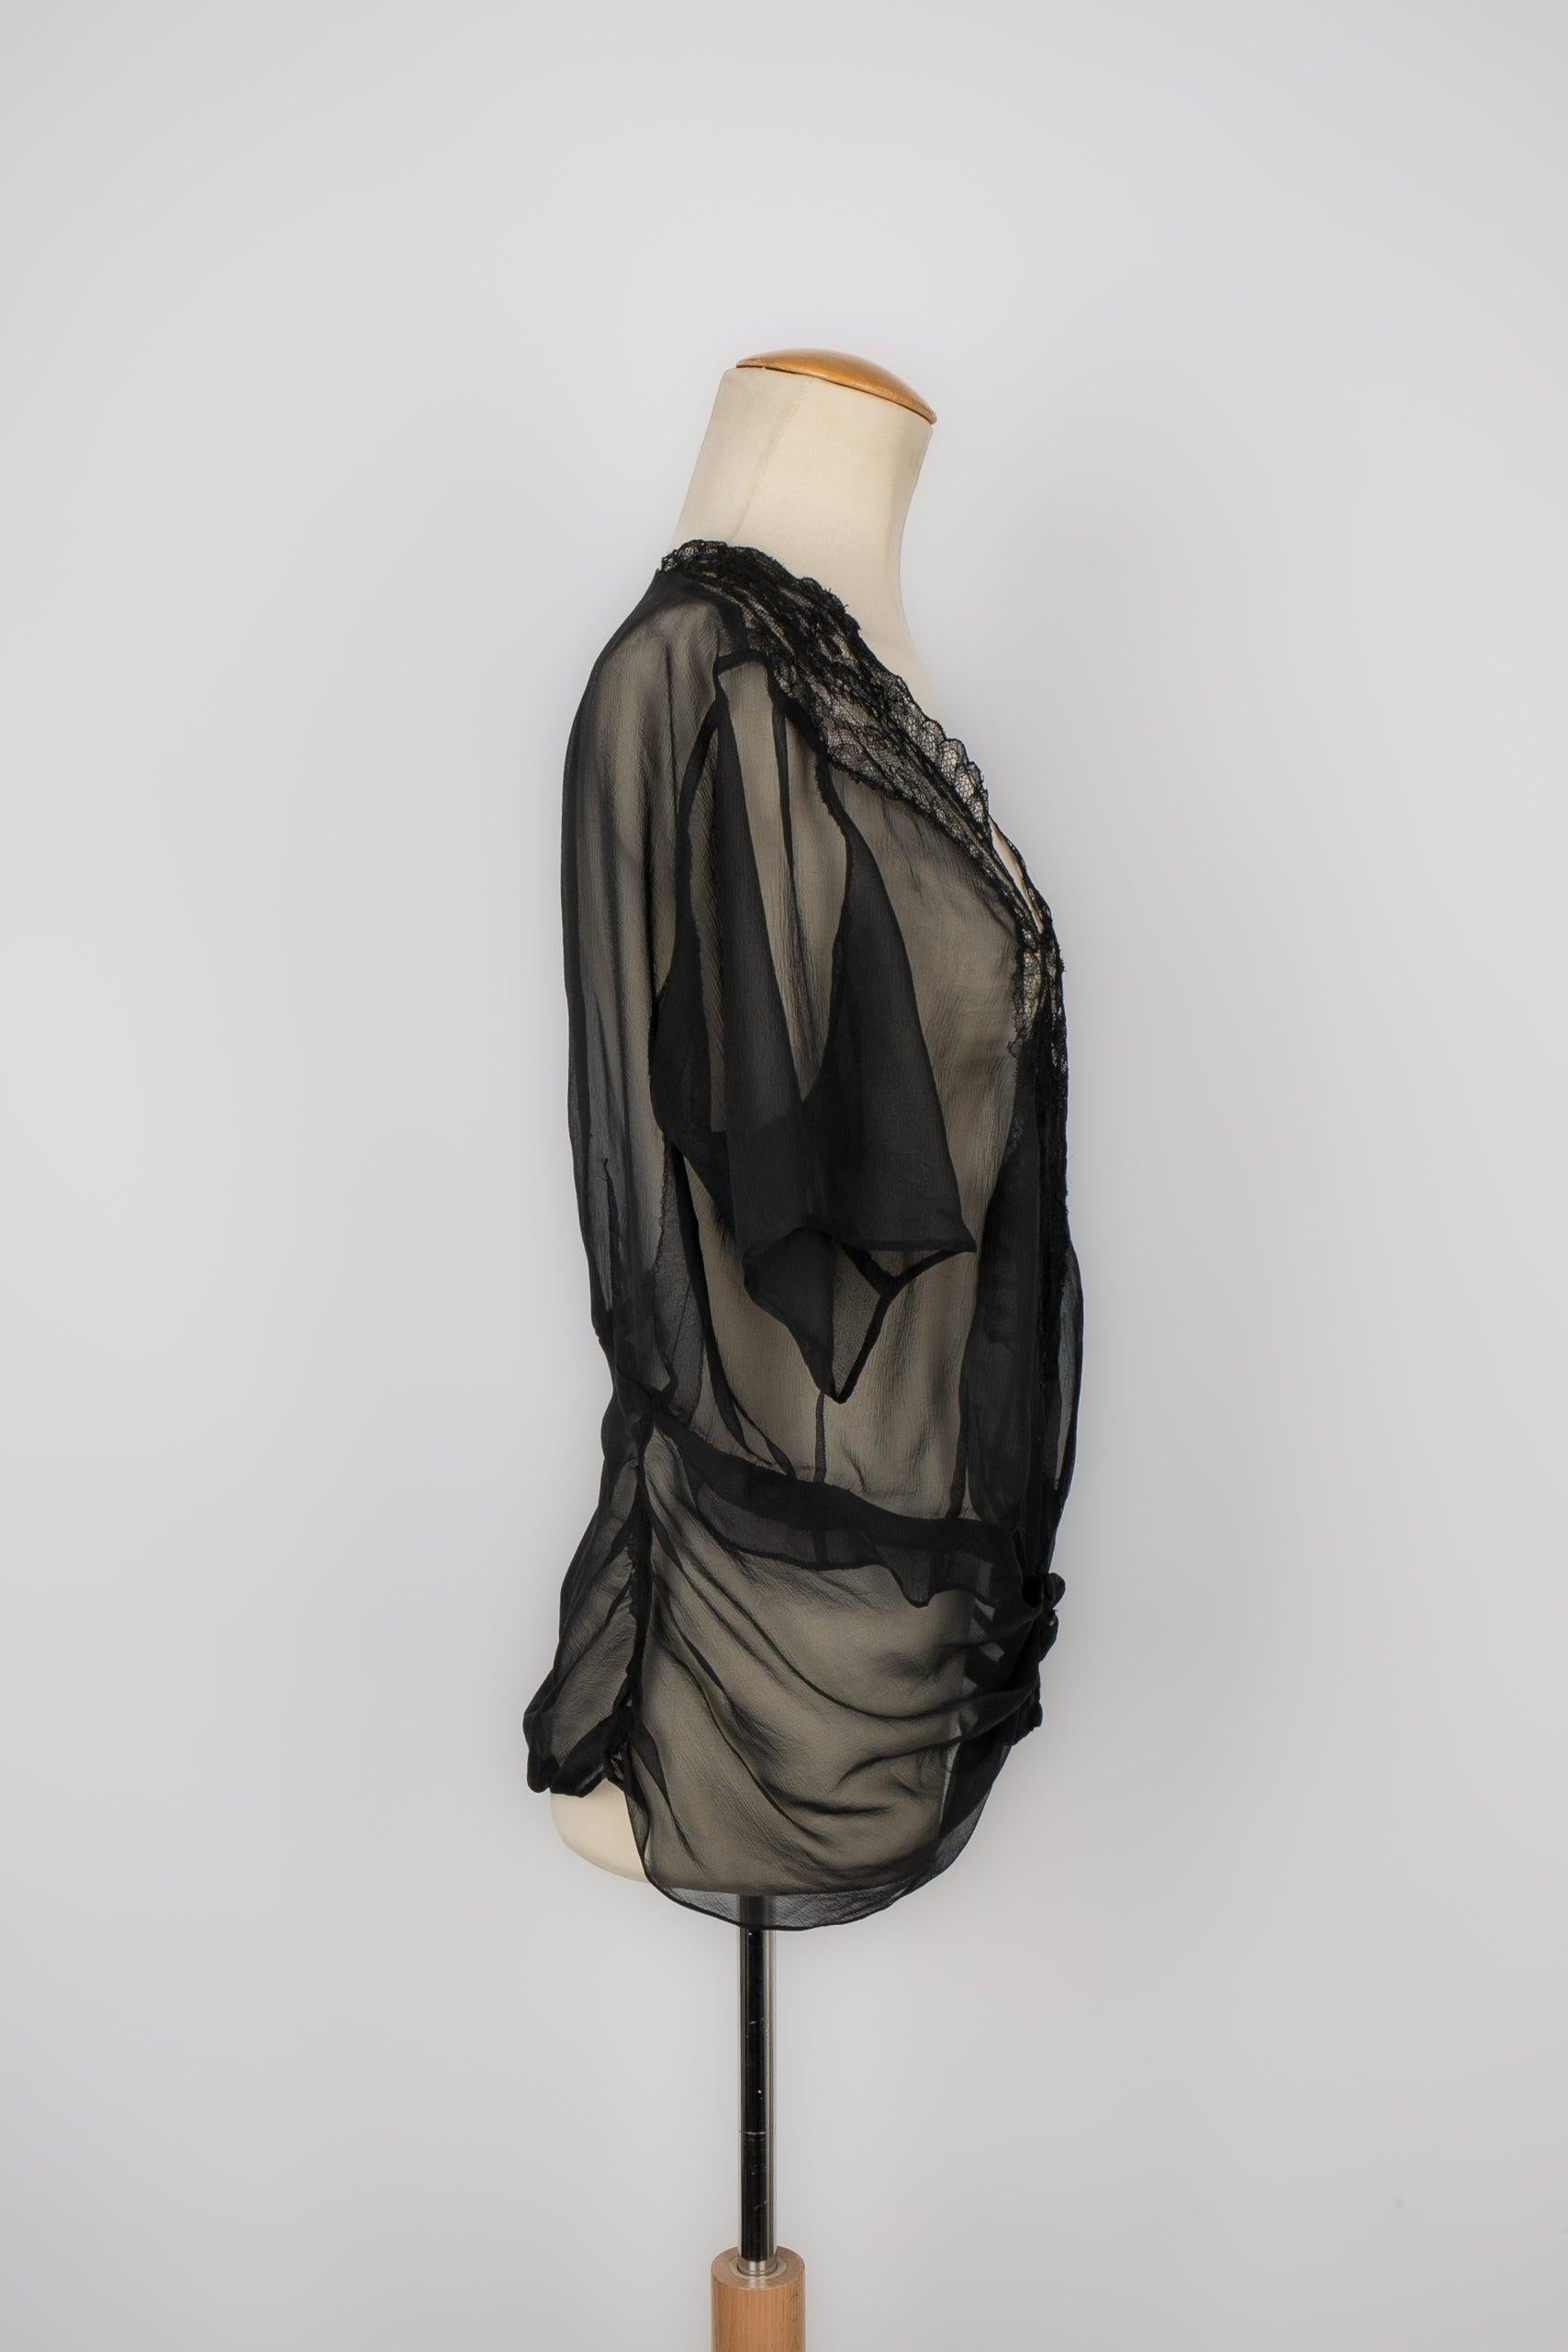 UNKNOWN - Silk muslin top with black lace. No size indicated, it fits a 36/38FR.

Additional information:
Condition: Very good condition
Dimensions: Shoulder width: 43 cm - Chest: 57 cm - Sleeve length: 23 cm - Length: 67 cm

Seller Reference: FV225